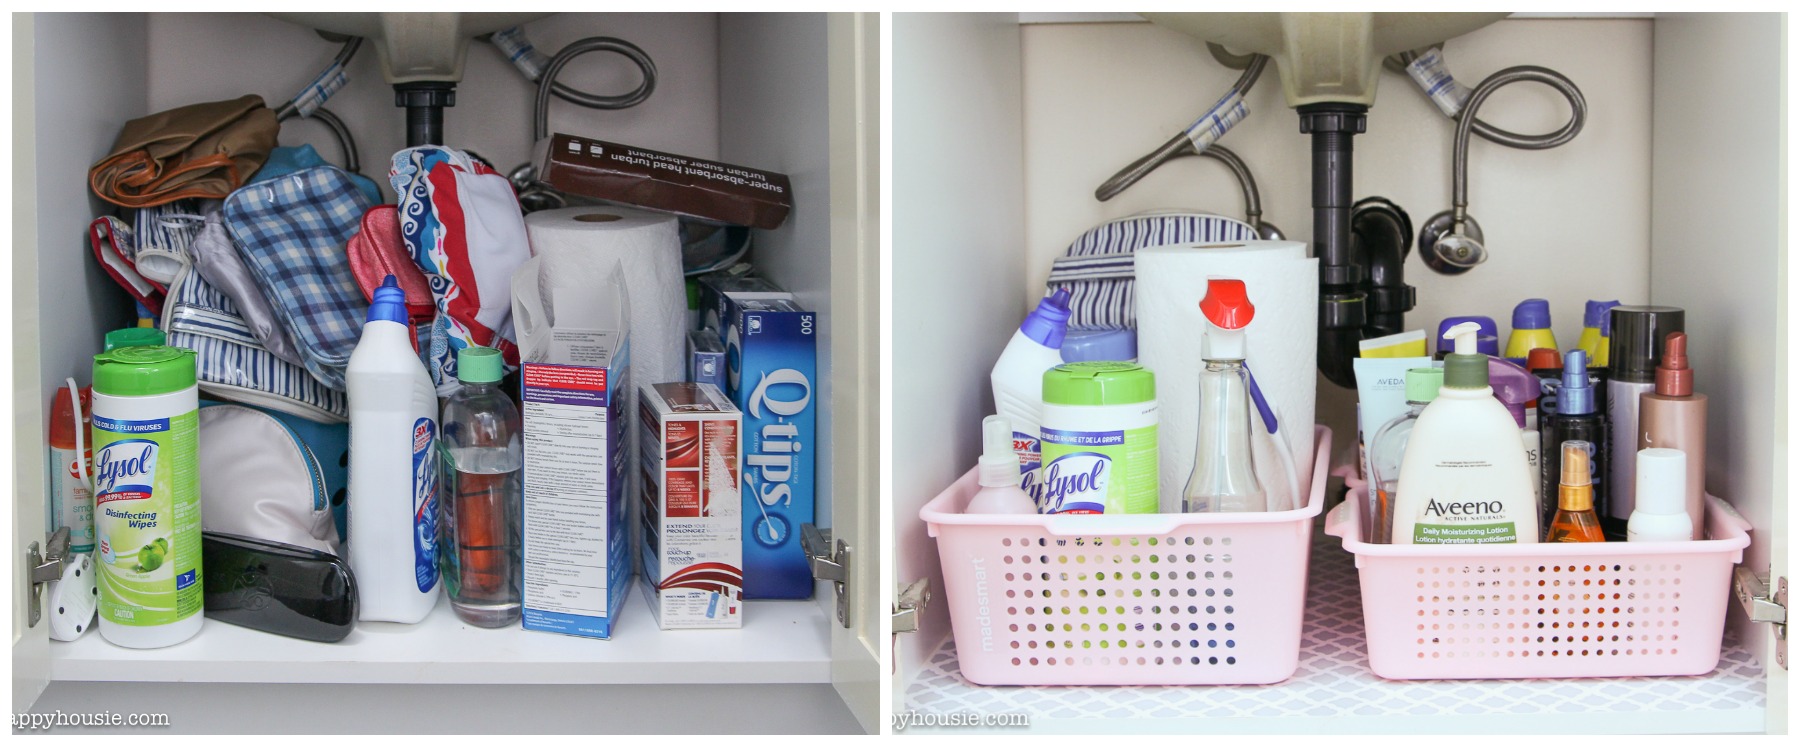 https://www.thehappyhousie.com/wp-content/uploads/2017/02/How-to-Organize-Your-Bathroom-our-Before-and-Afters-under-sink.jpg